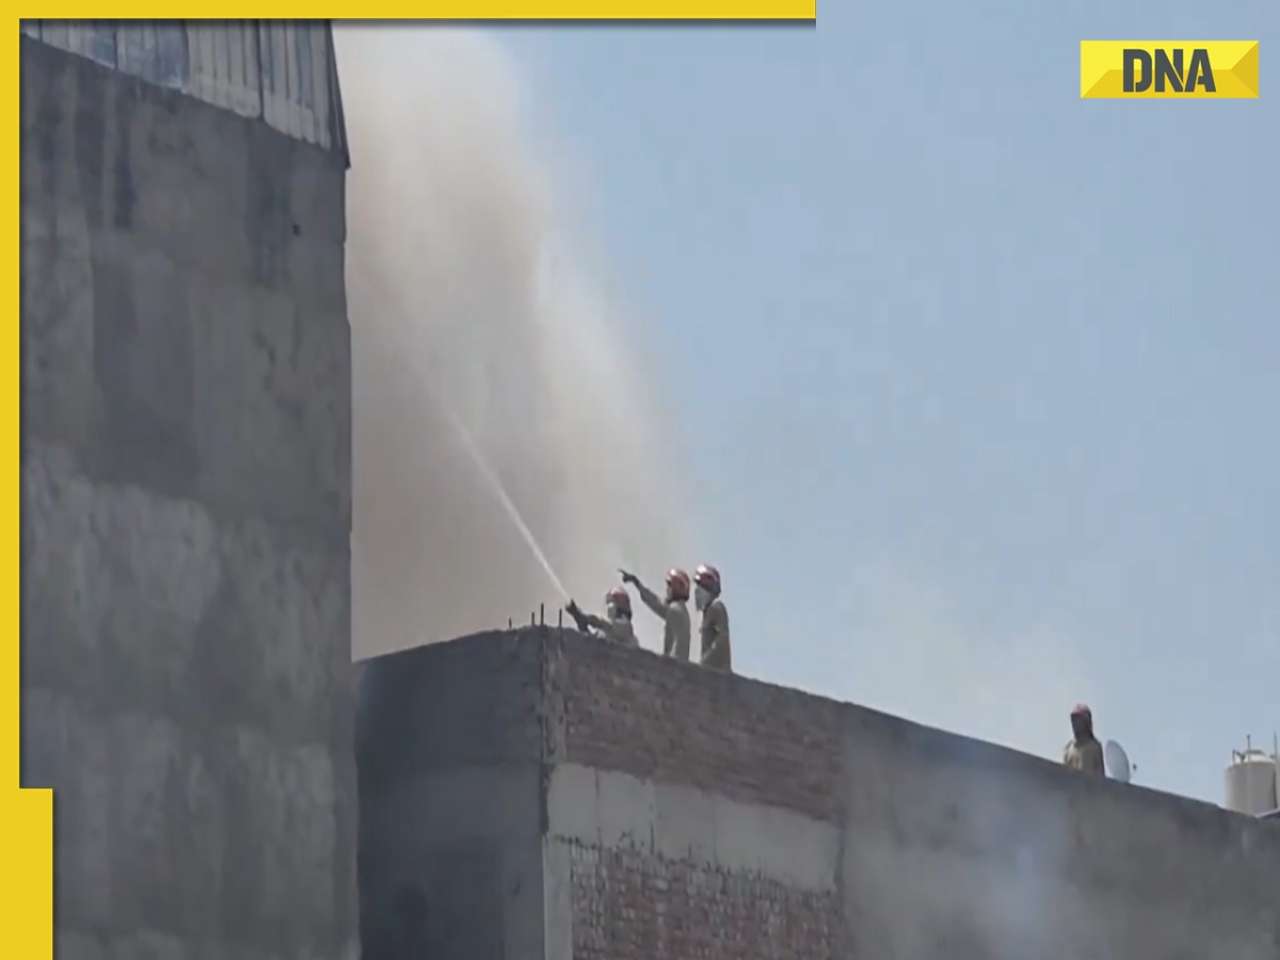 Delhi: Massive fire breaks out in Mundka factory, 35 fire engines at spot